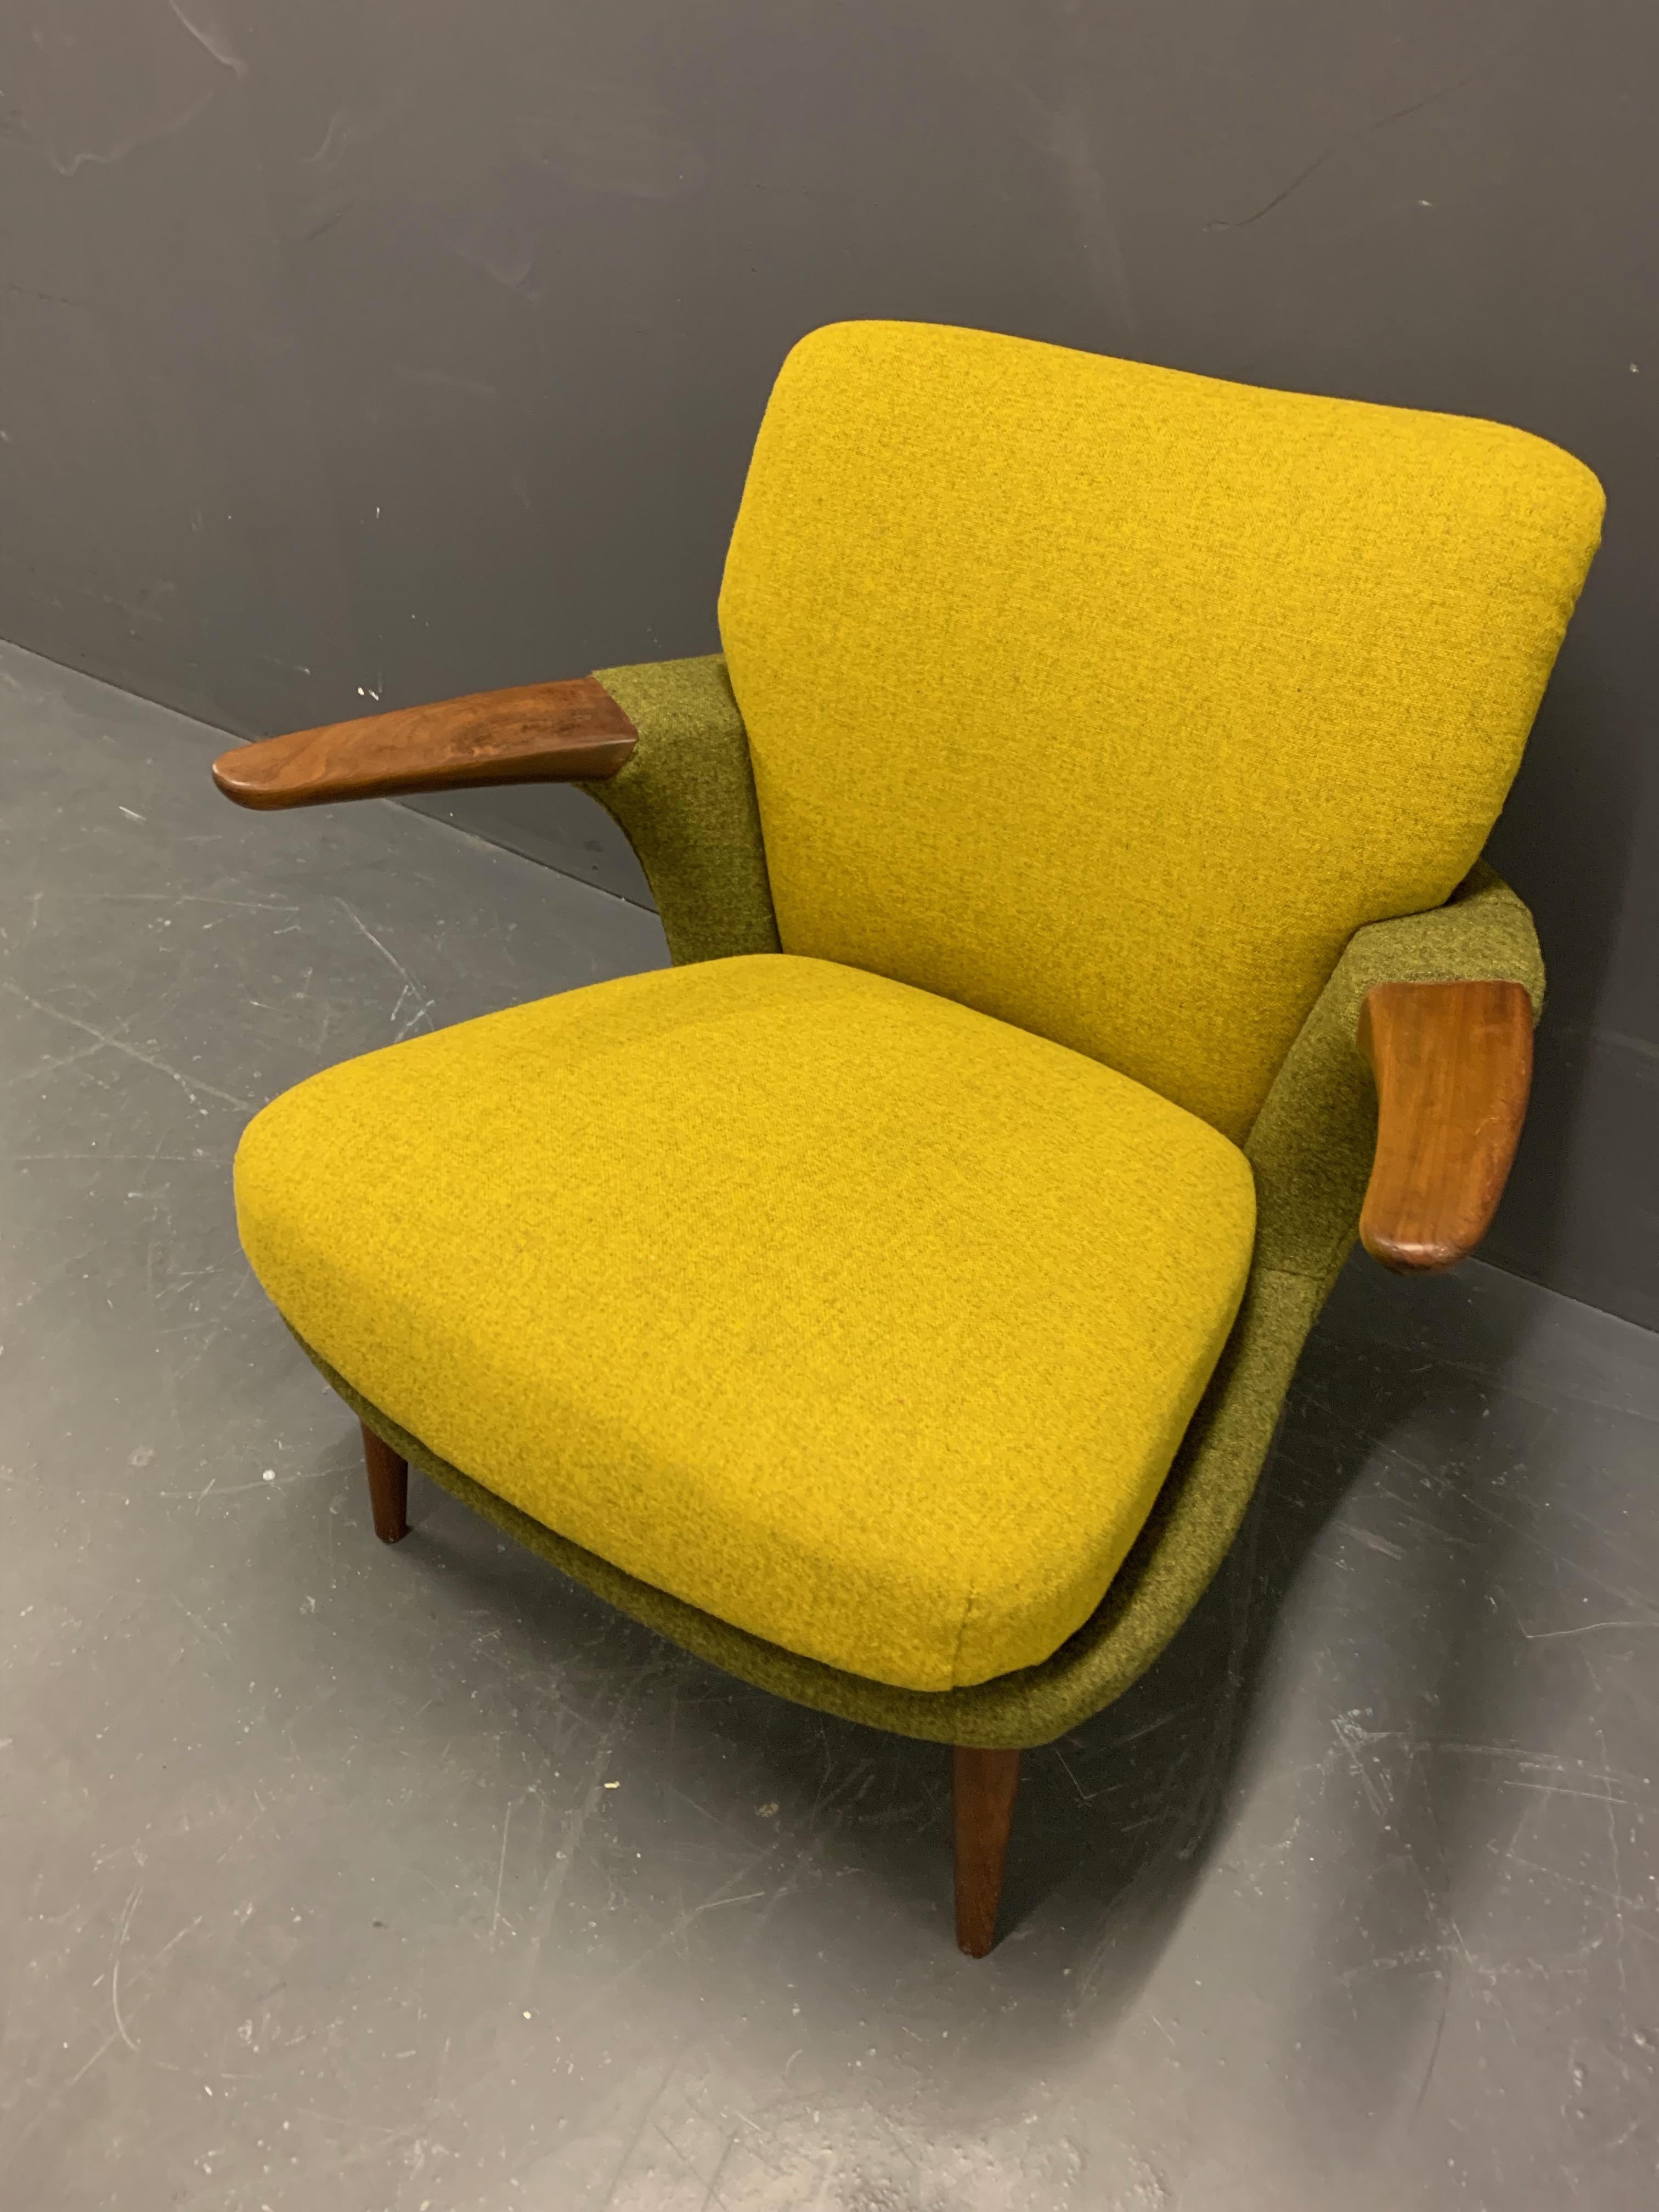 Exceptionally Rare, Possibly Unique Ib Kofod-Larsen Chair For Sale 1